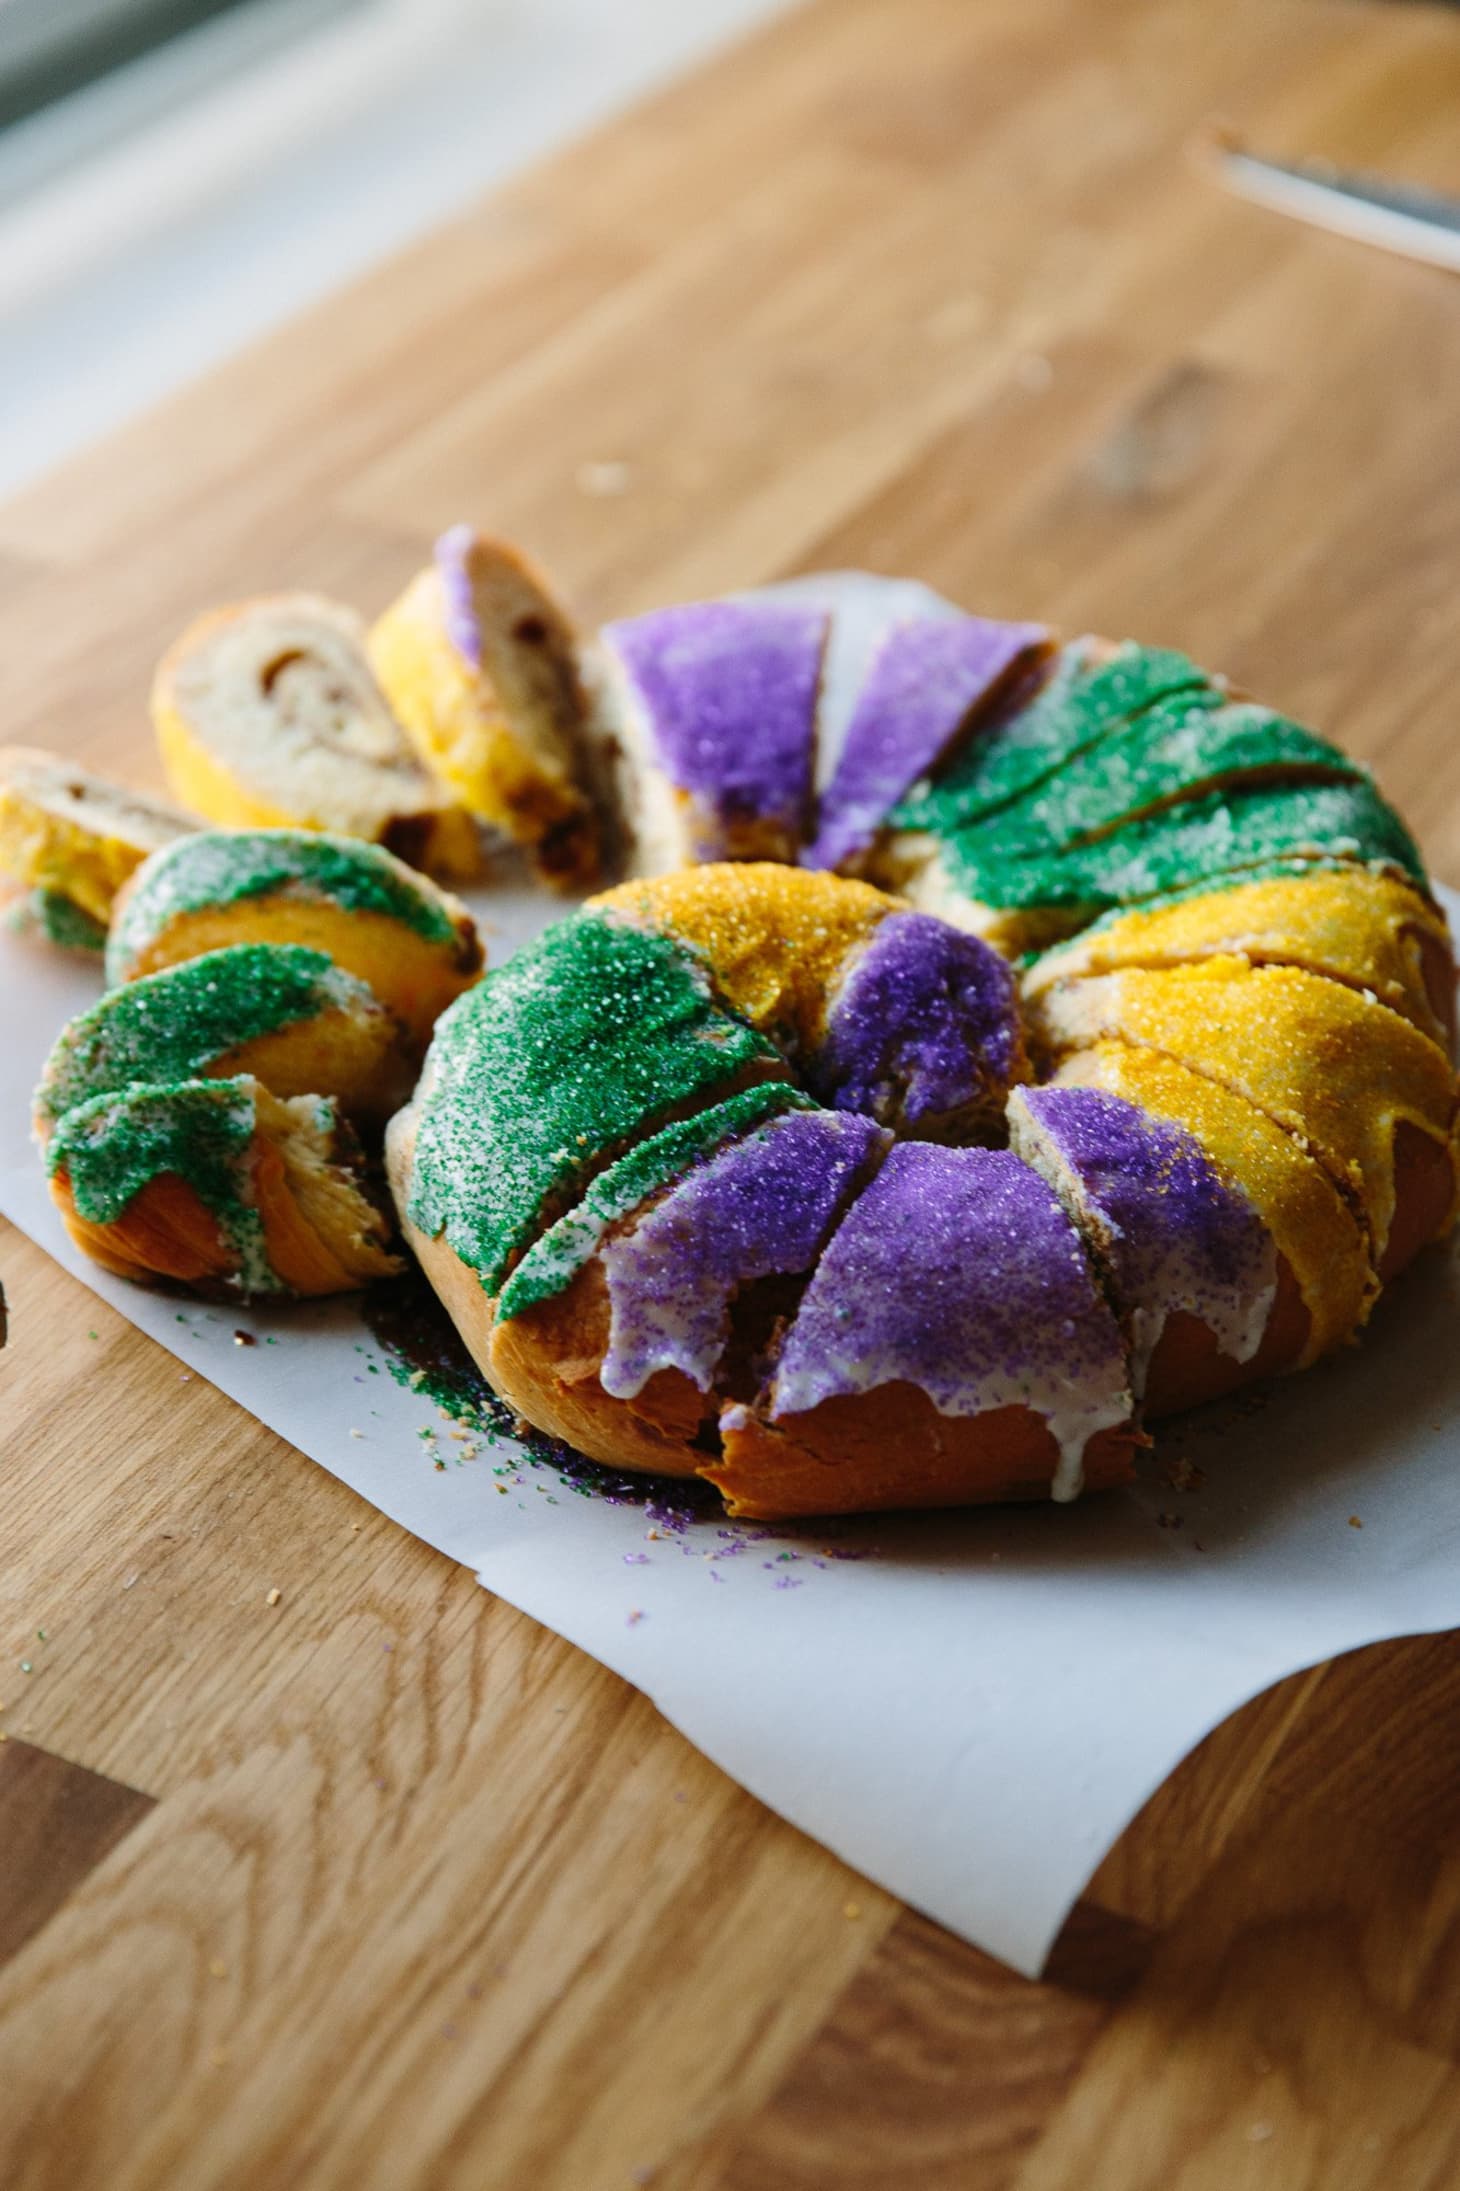 How To Make a King Cake for Mardi Gras | Kitchn